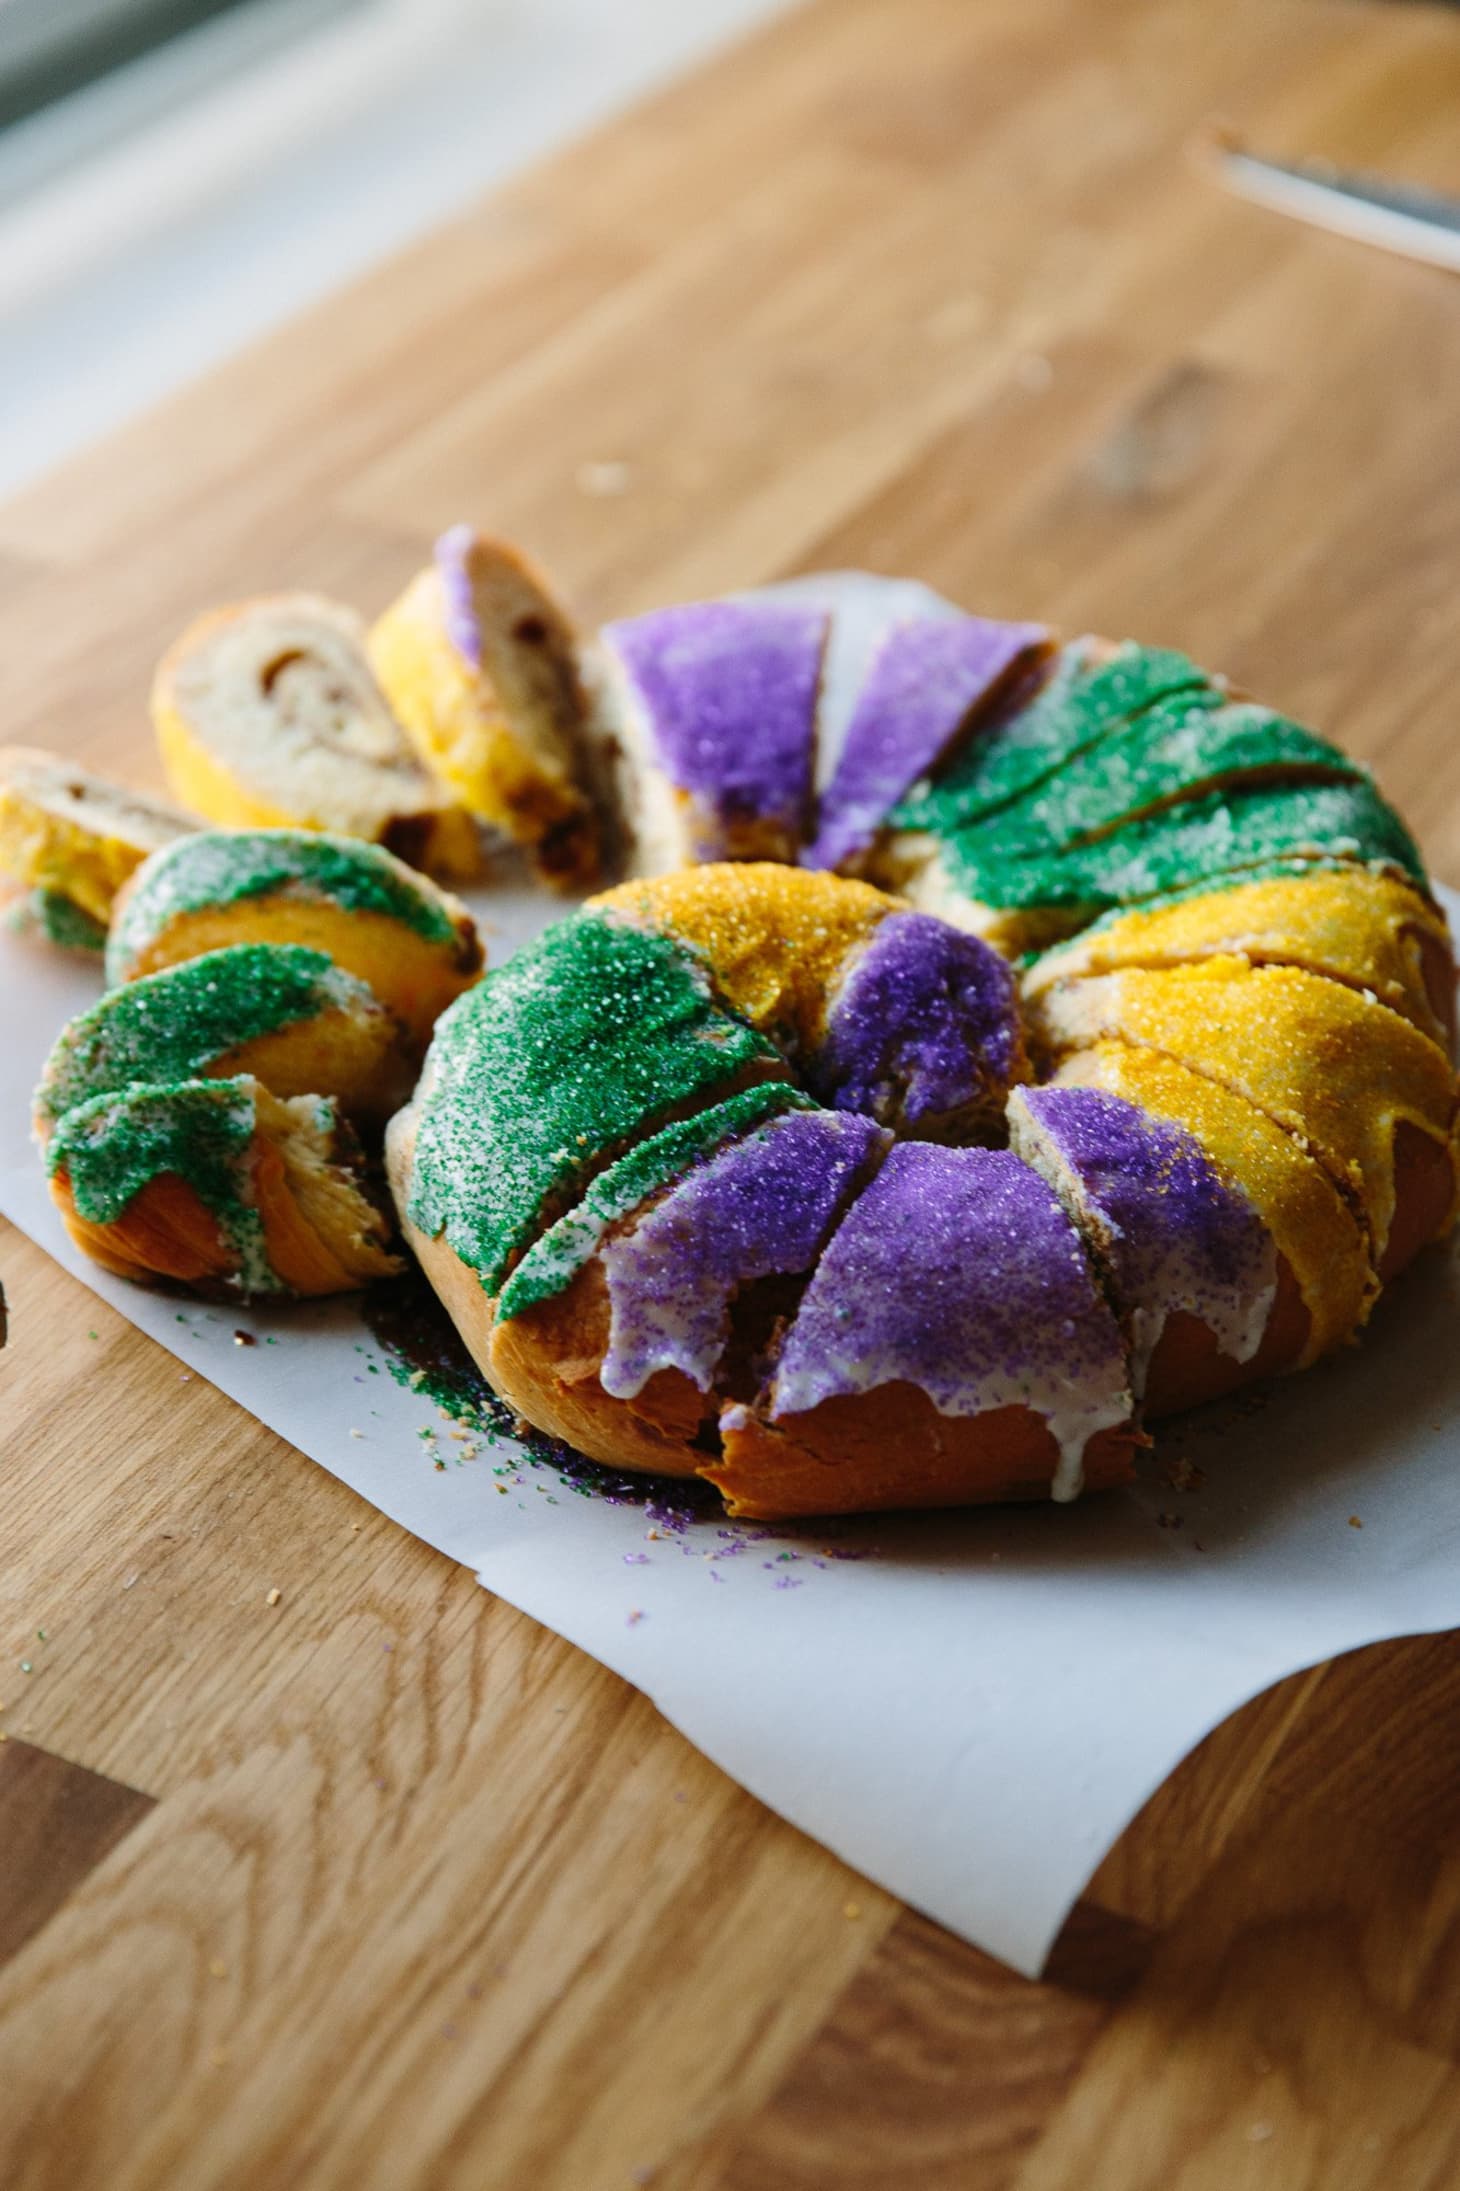 How To Make a King Cake for Mardi Gras | Kitchn